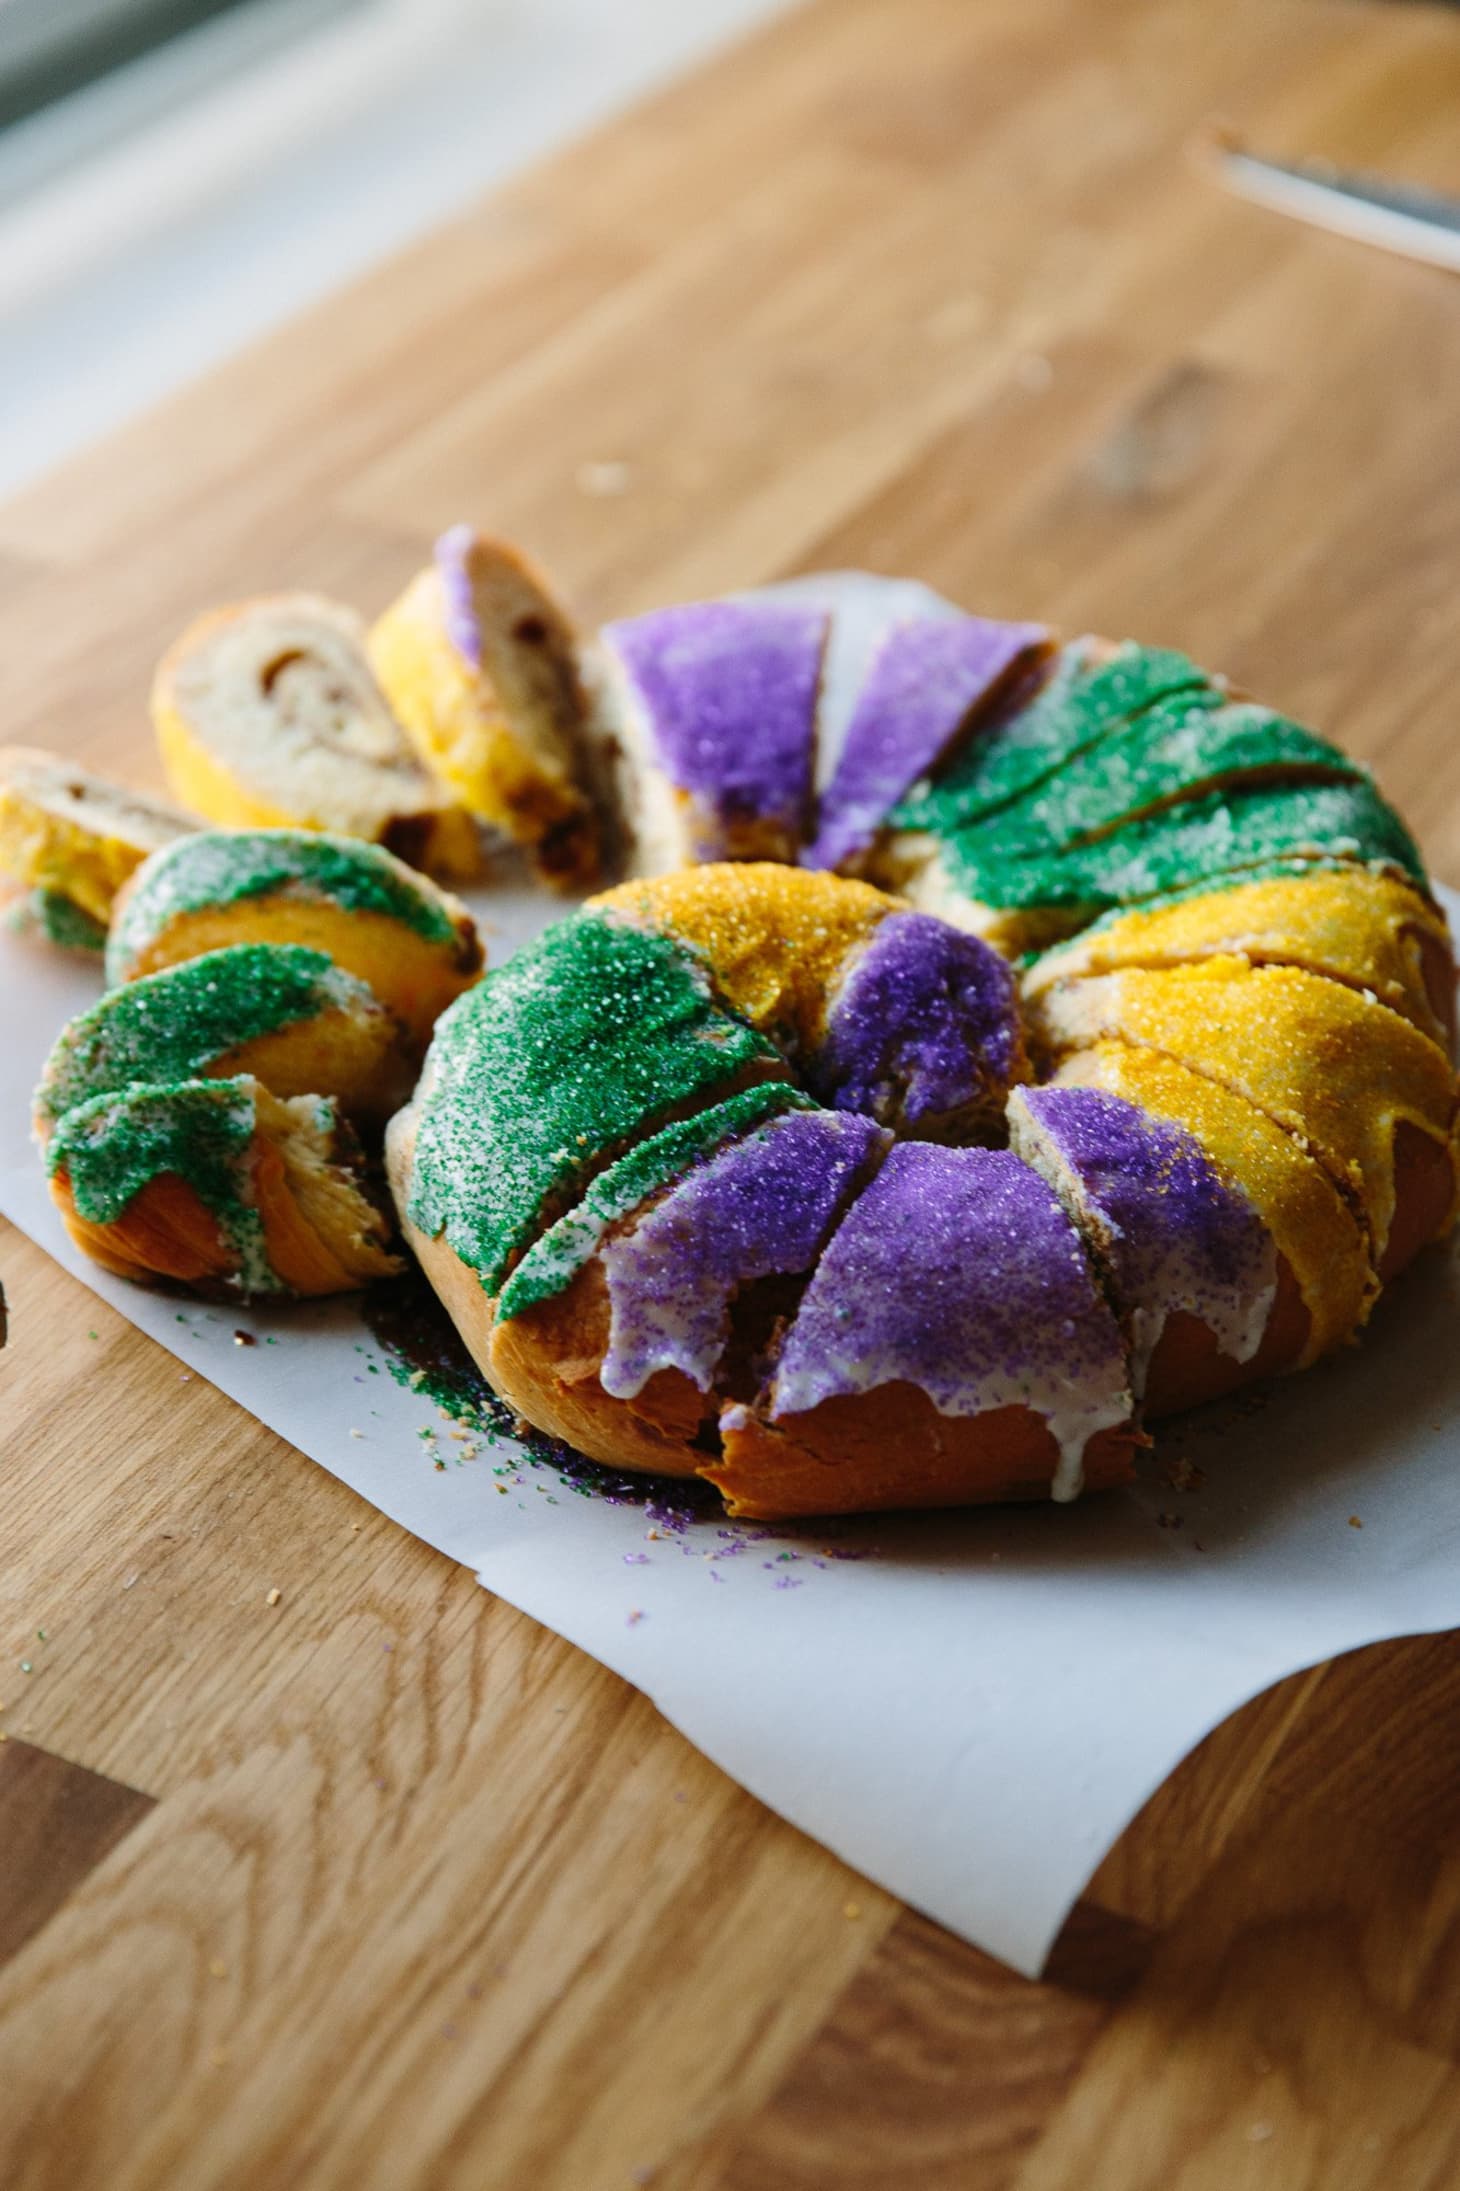 How To Make a King Cake for Mardi Gras | Kitchn